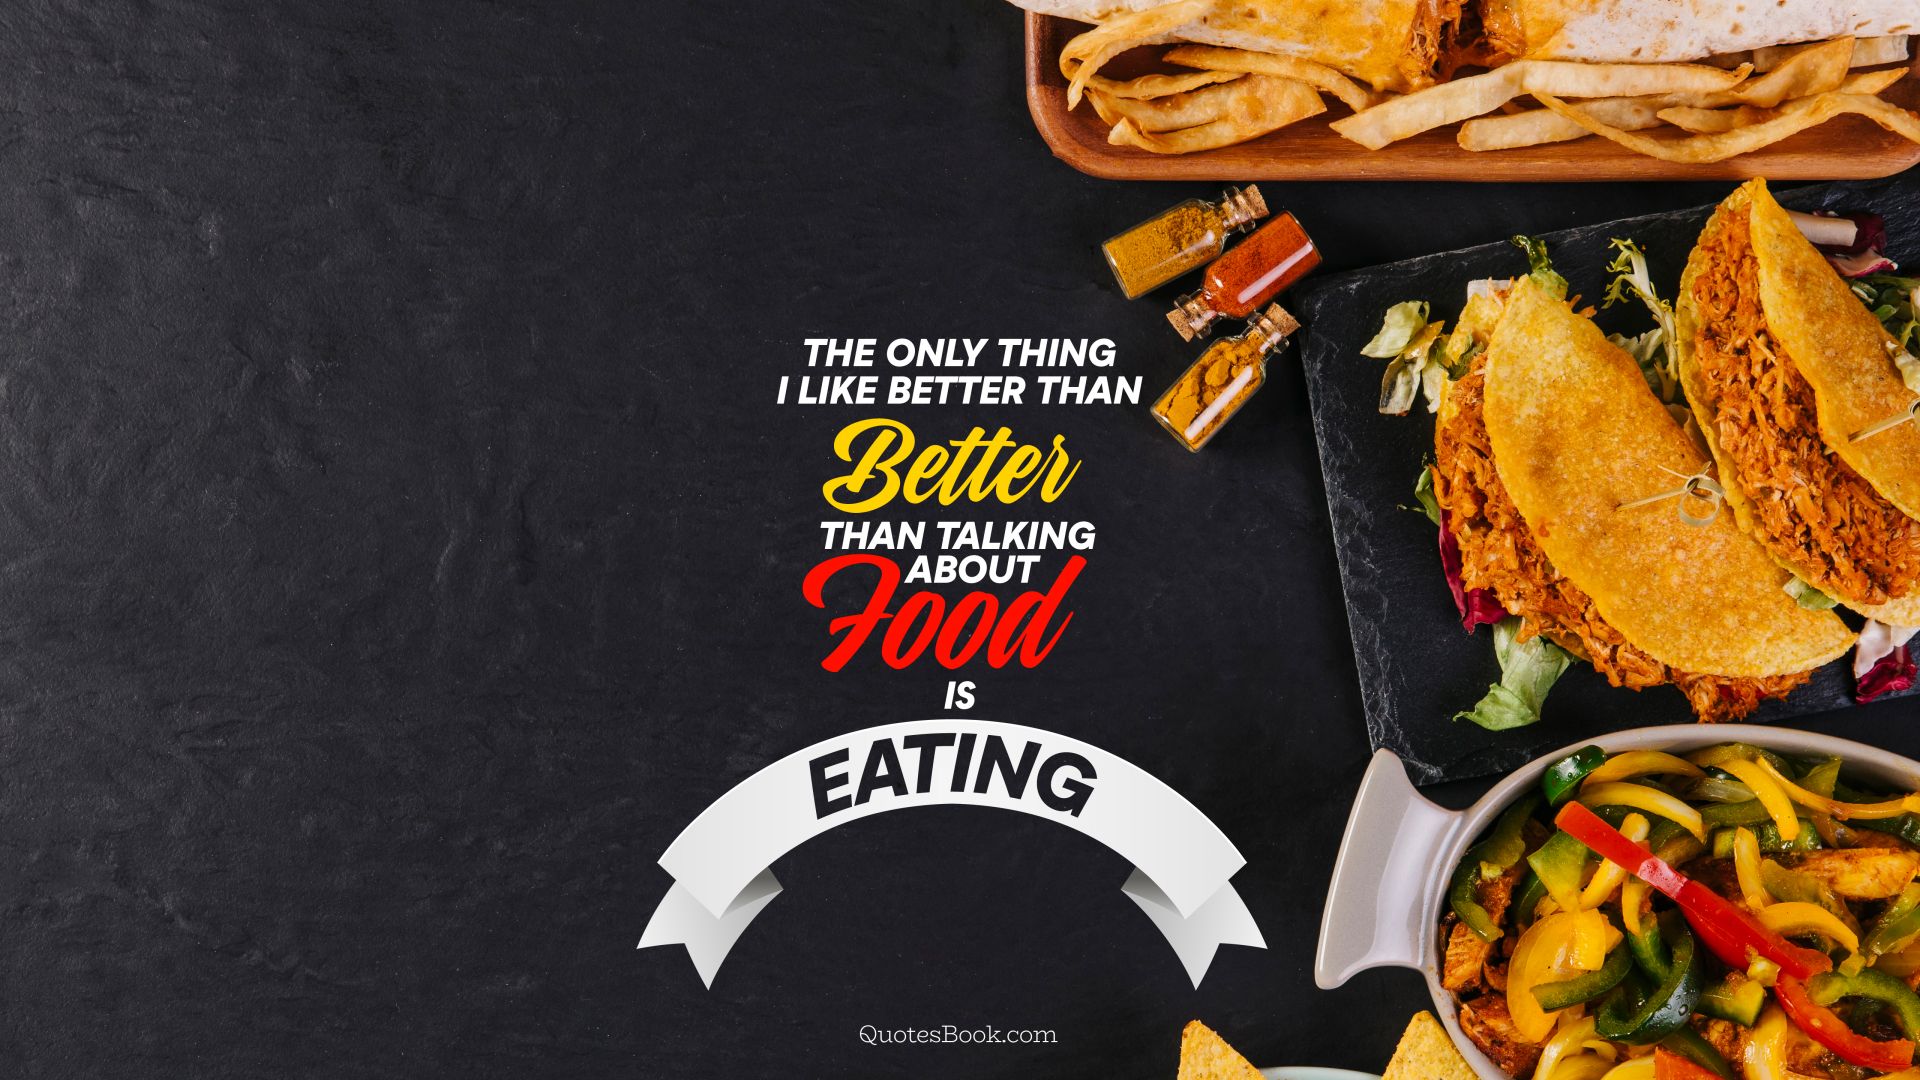 The only thing i like better than better than talking about food is eating